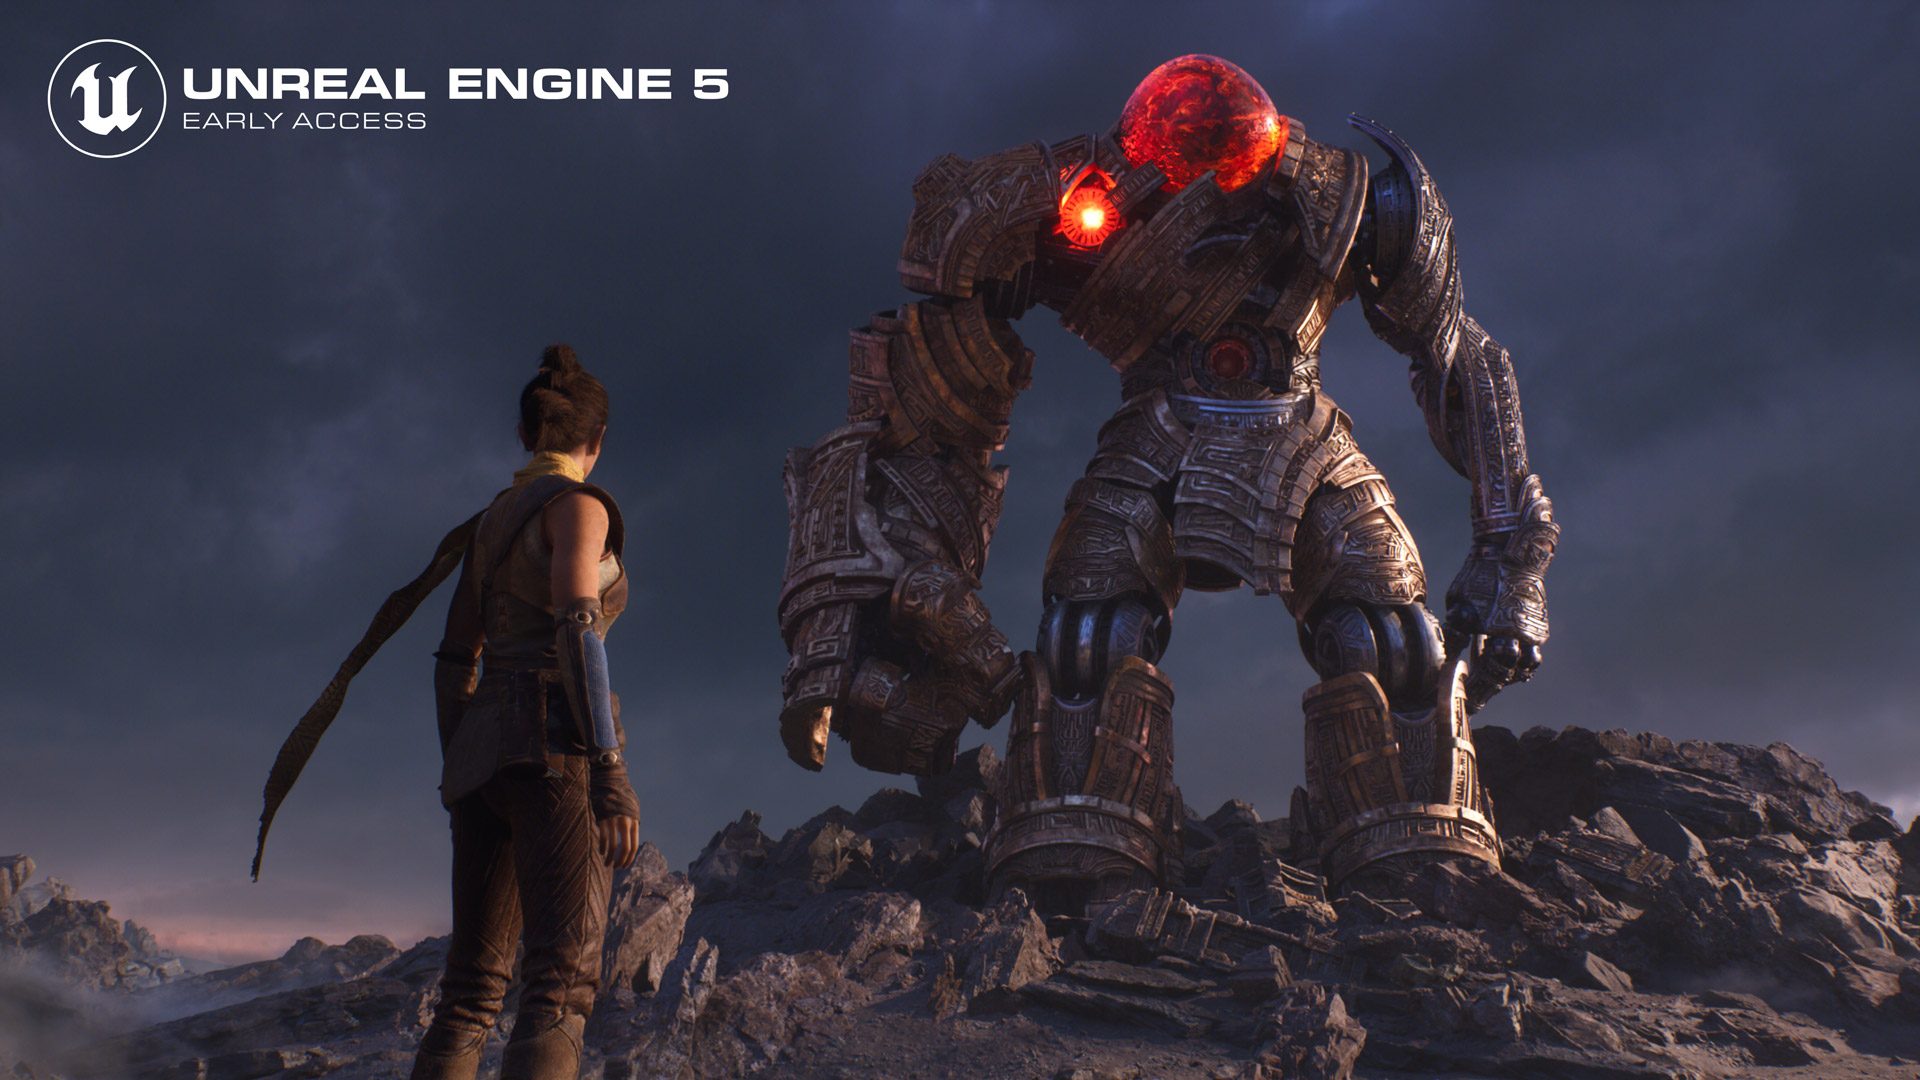 Unreal Engine 5 Launches in Early Access with New VR Template Built on